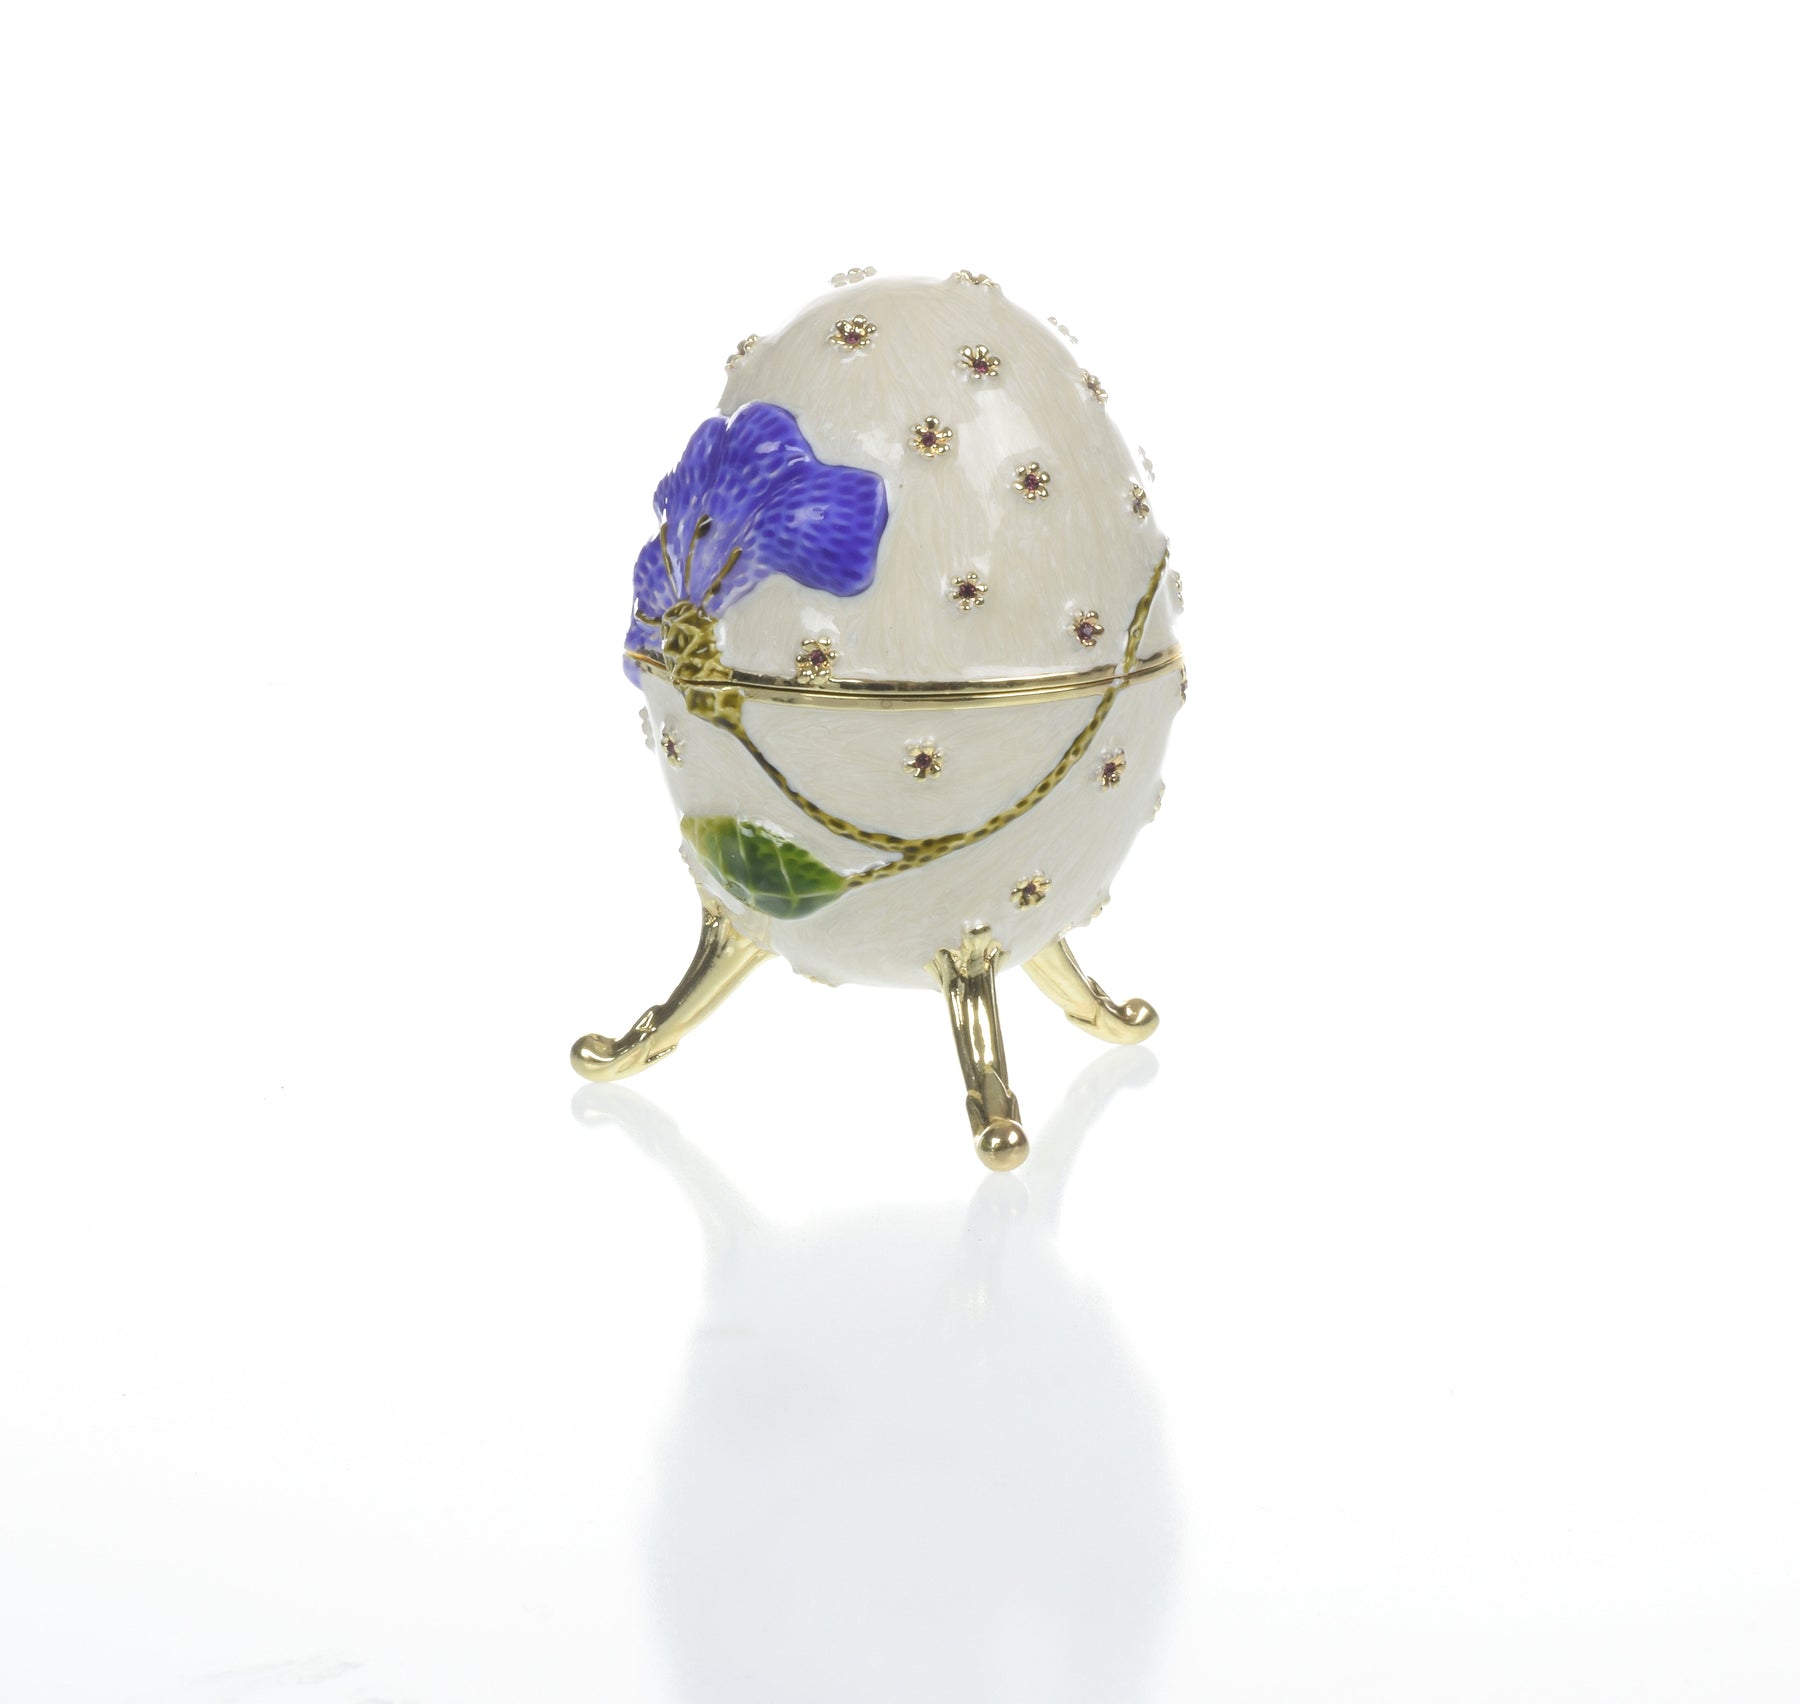 White with Blue flower Music box Fur Elise by Beethoven Faberge Egg